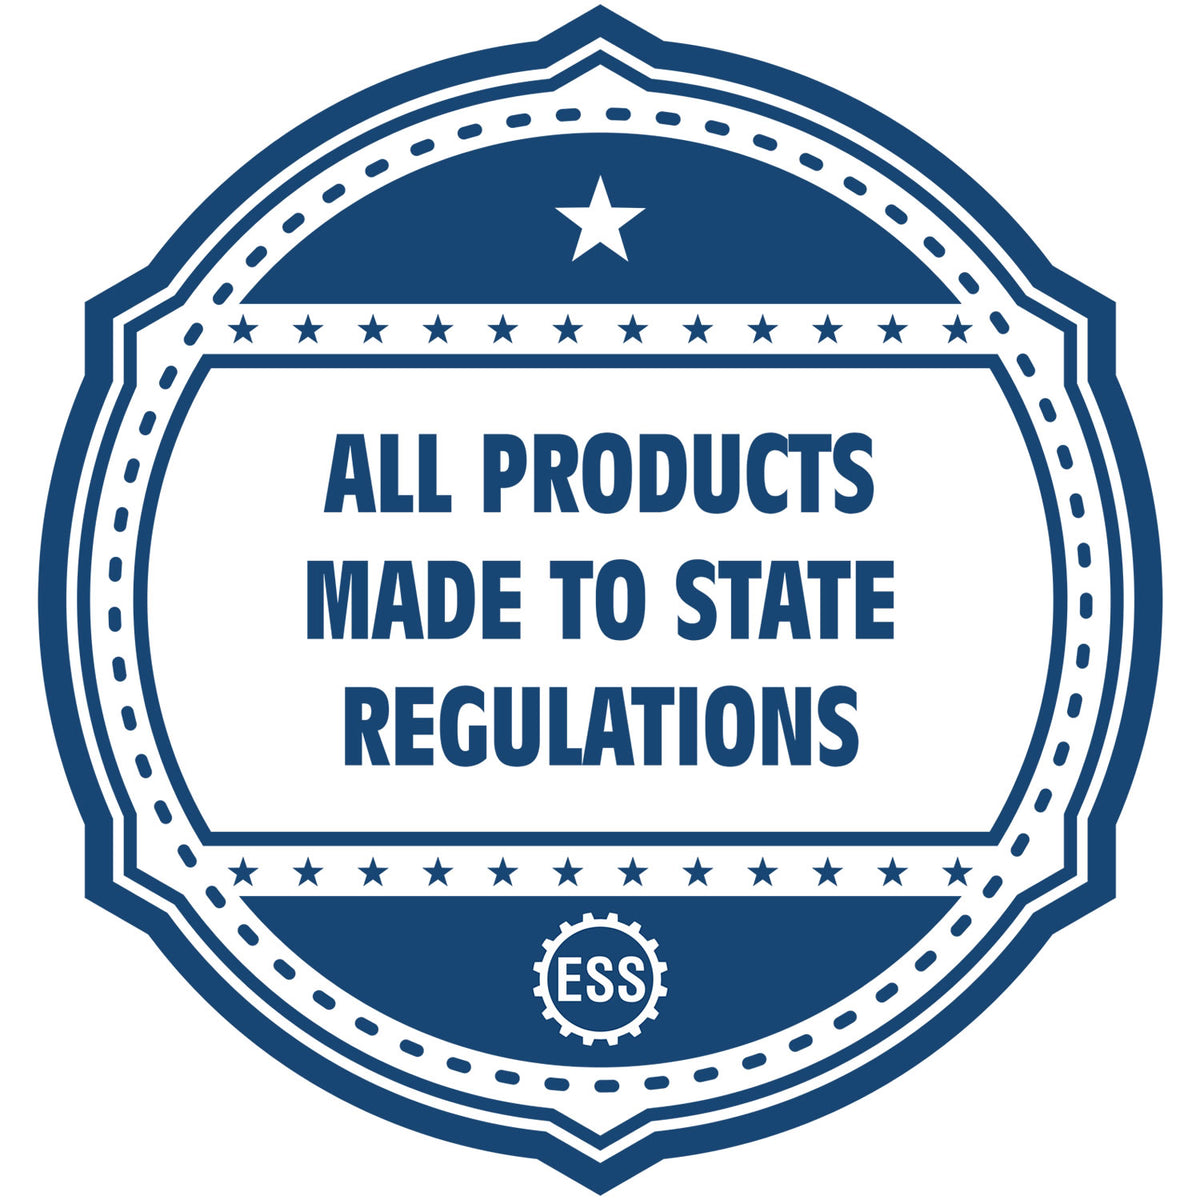 A blue icon or badge for the Hybrid New Hampshire Engineer Seal showing that this product is made in compliance with state regulations.